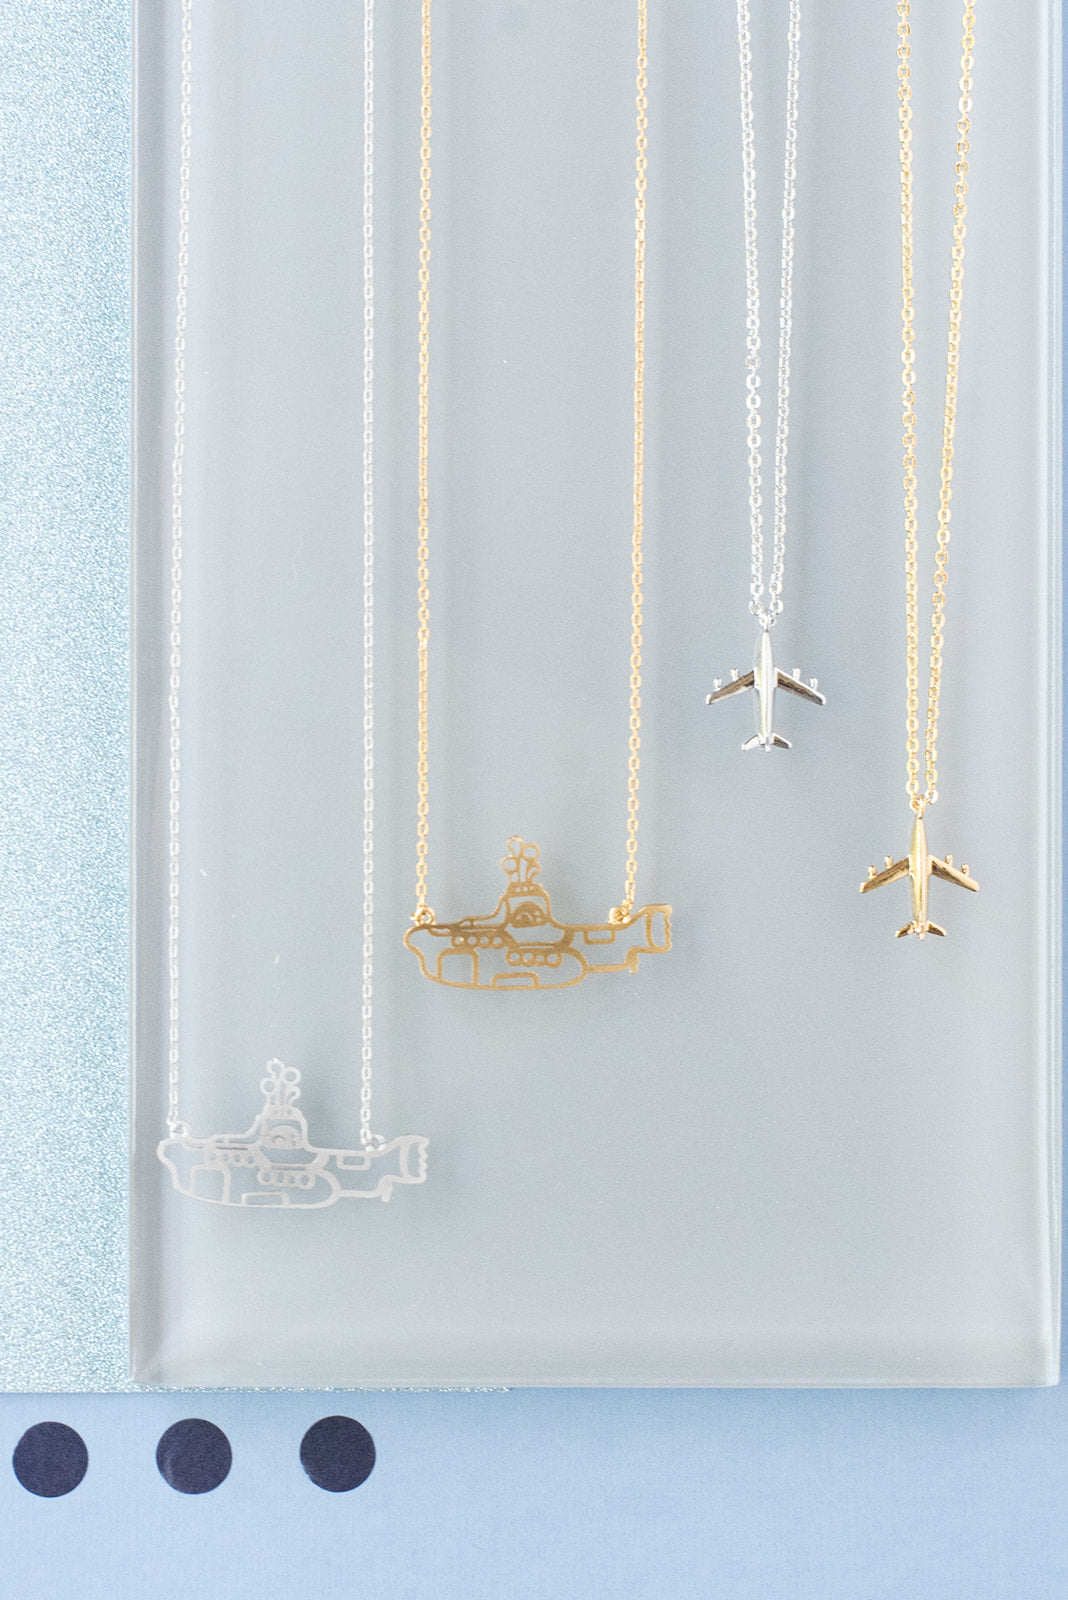 Airplane Necklace - Shop on Pinterest